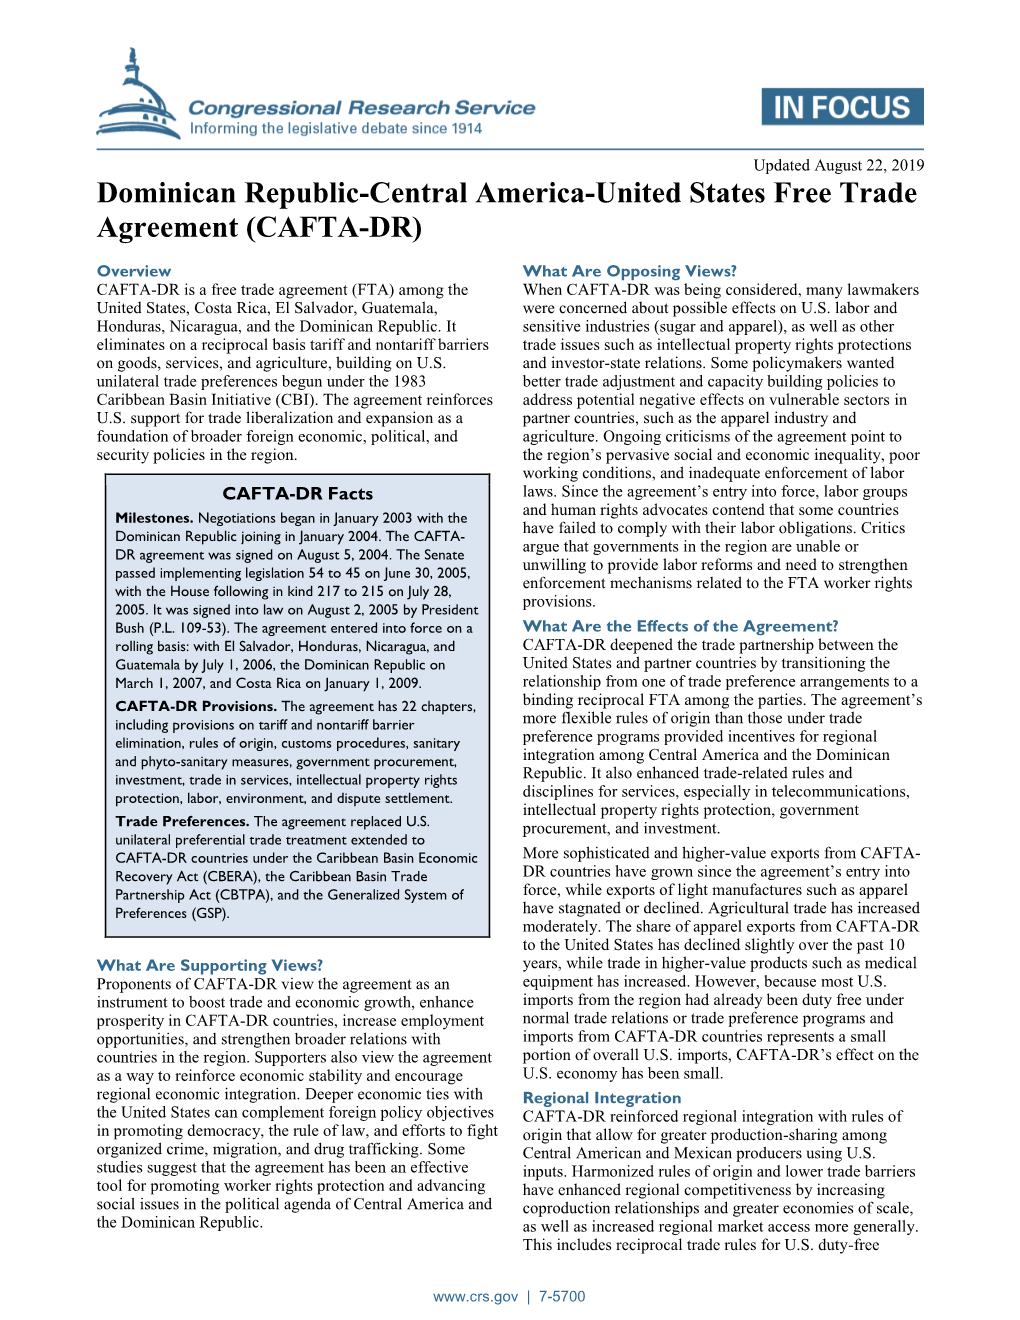 Dominican Republic-Central America-United States Free Trade Agreement (CAFTA-DR)